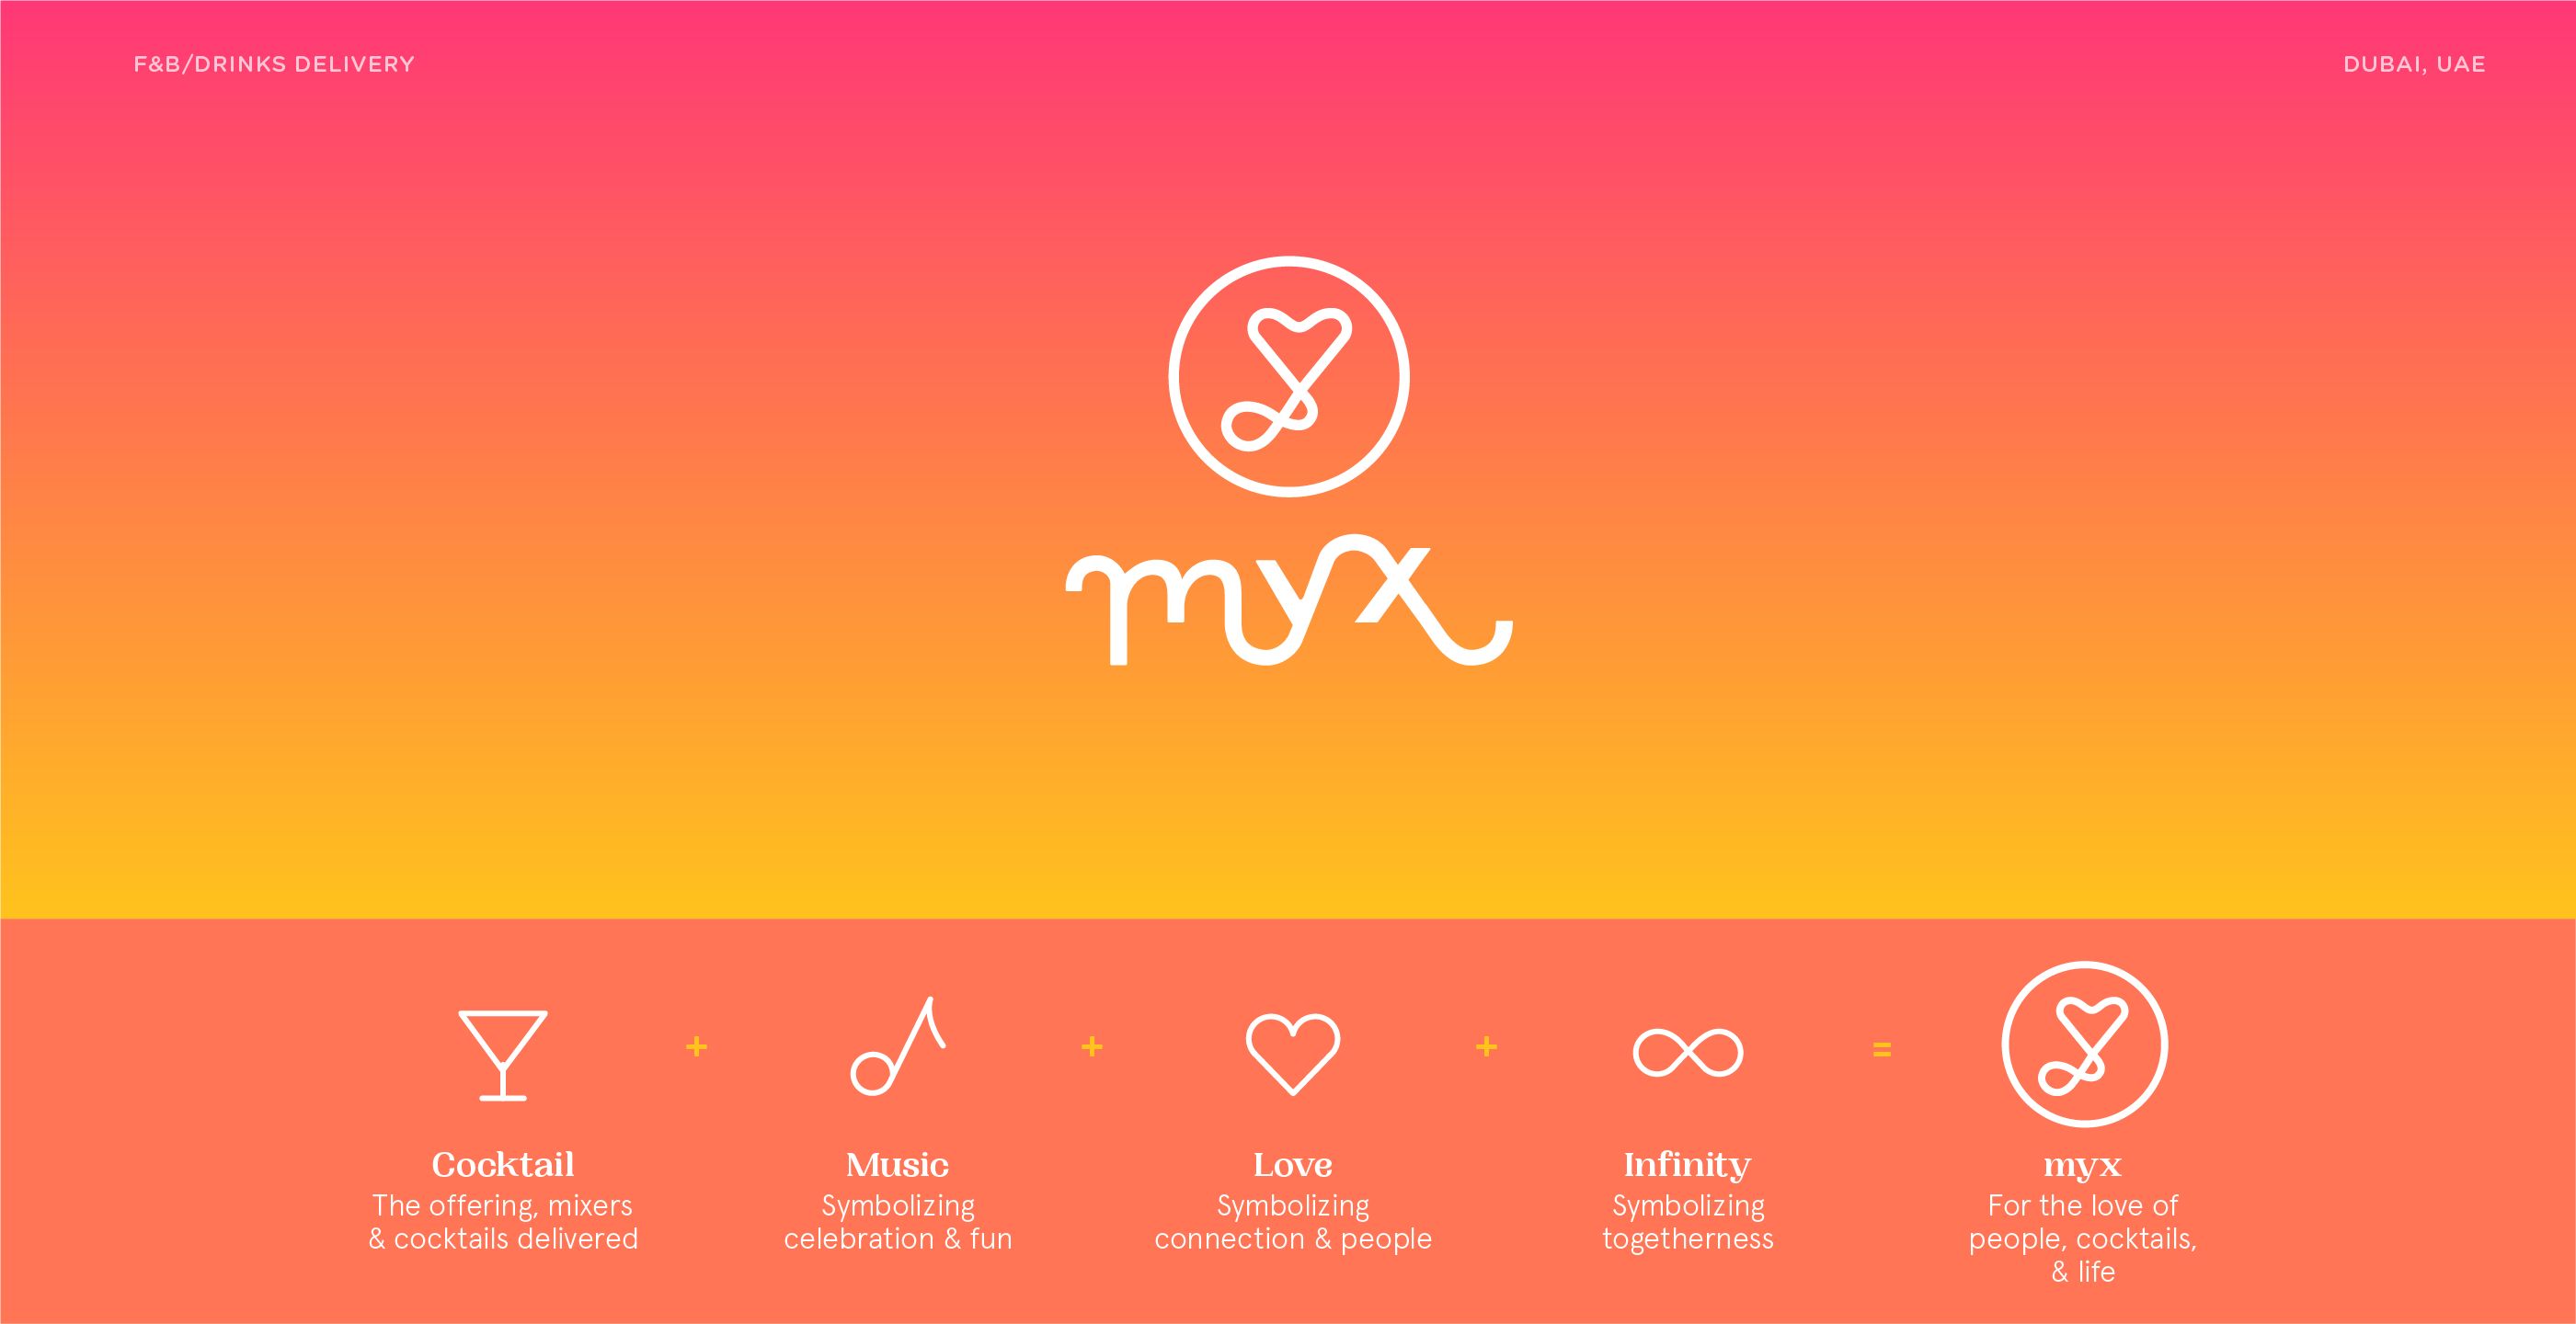 myx - online cocktail delivery